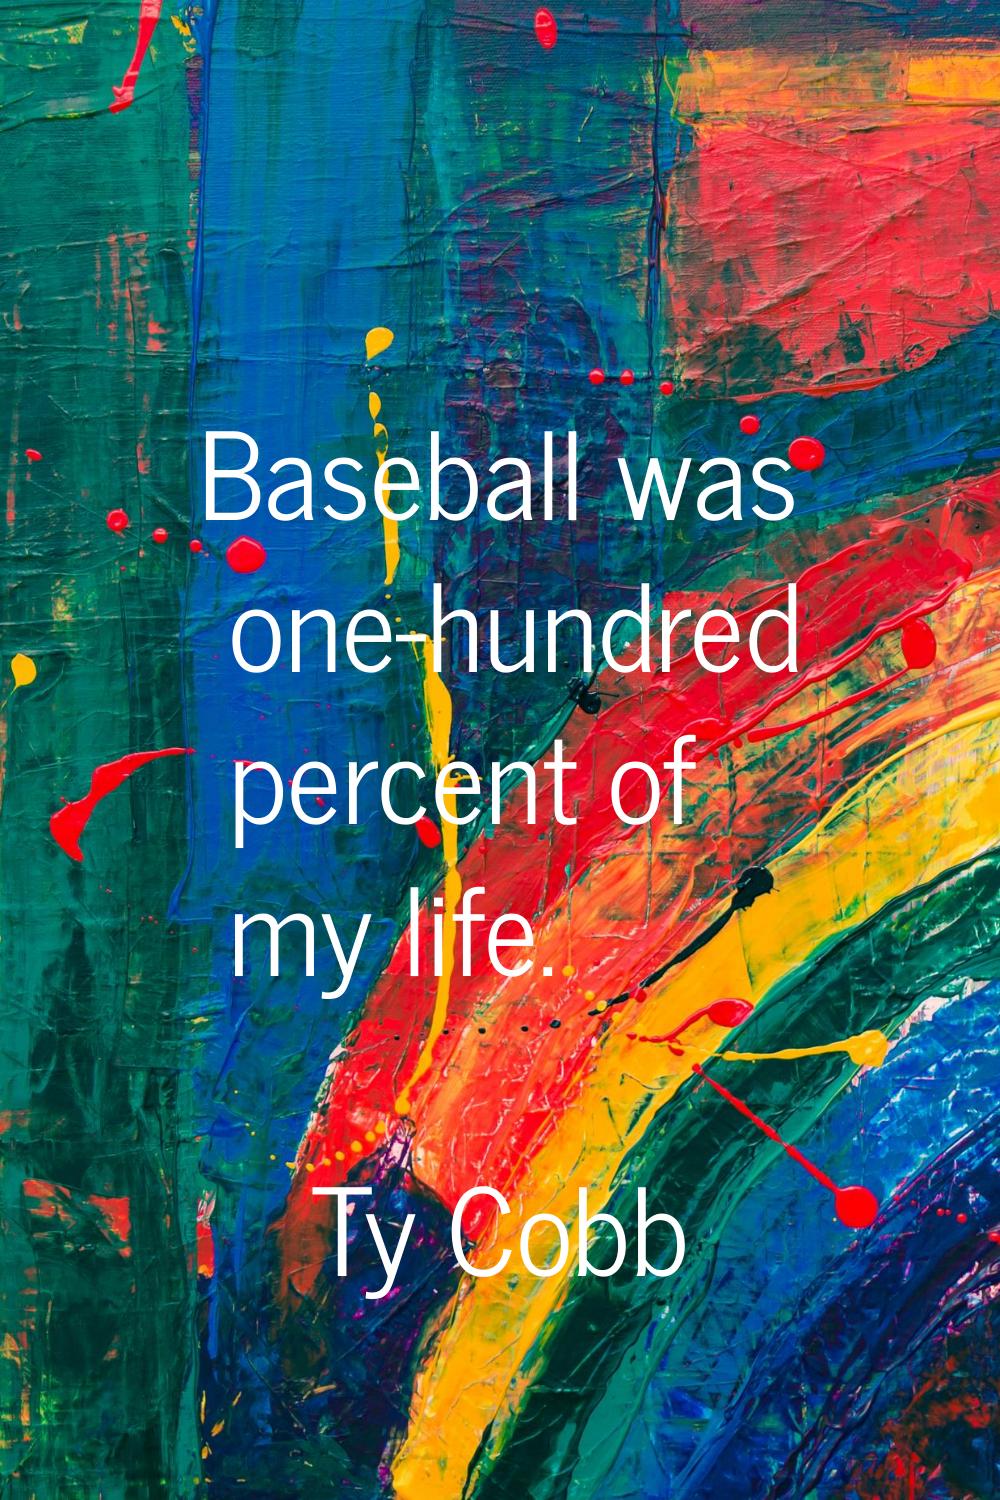 Baseball was one-hundred percent of my life.